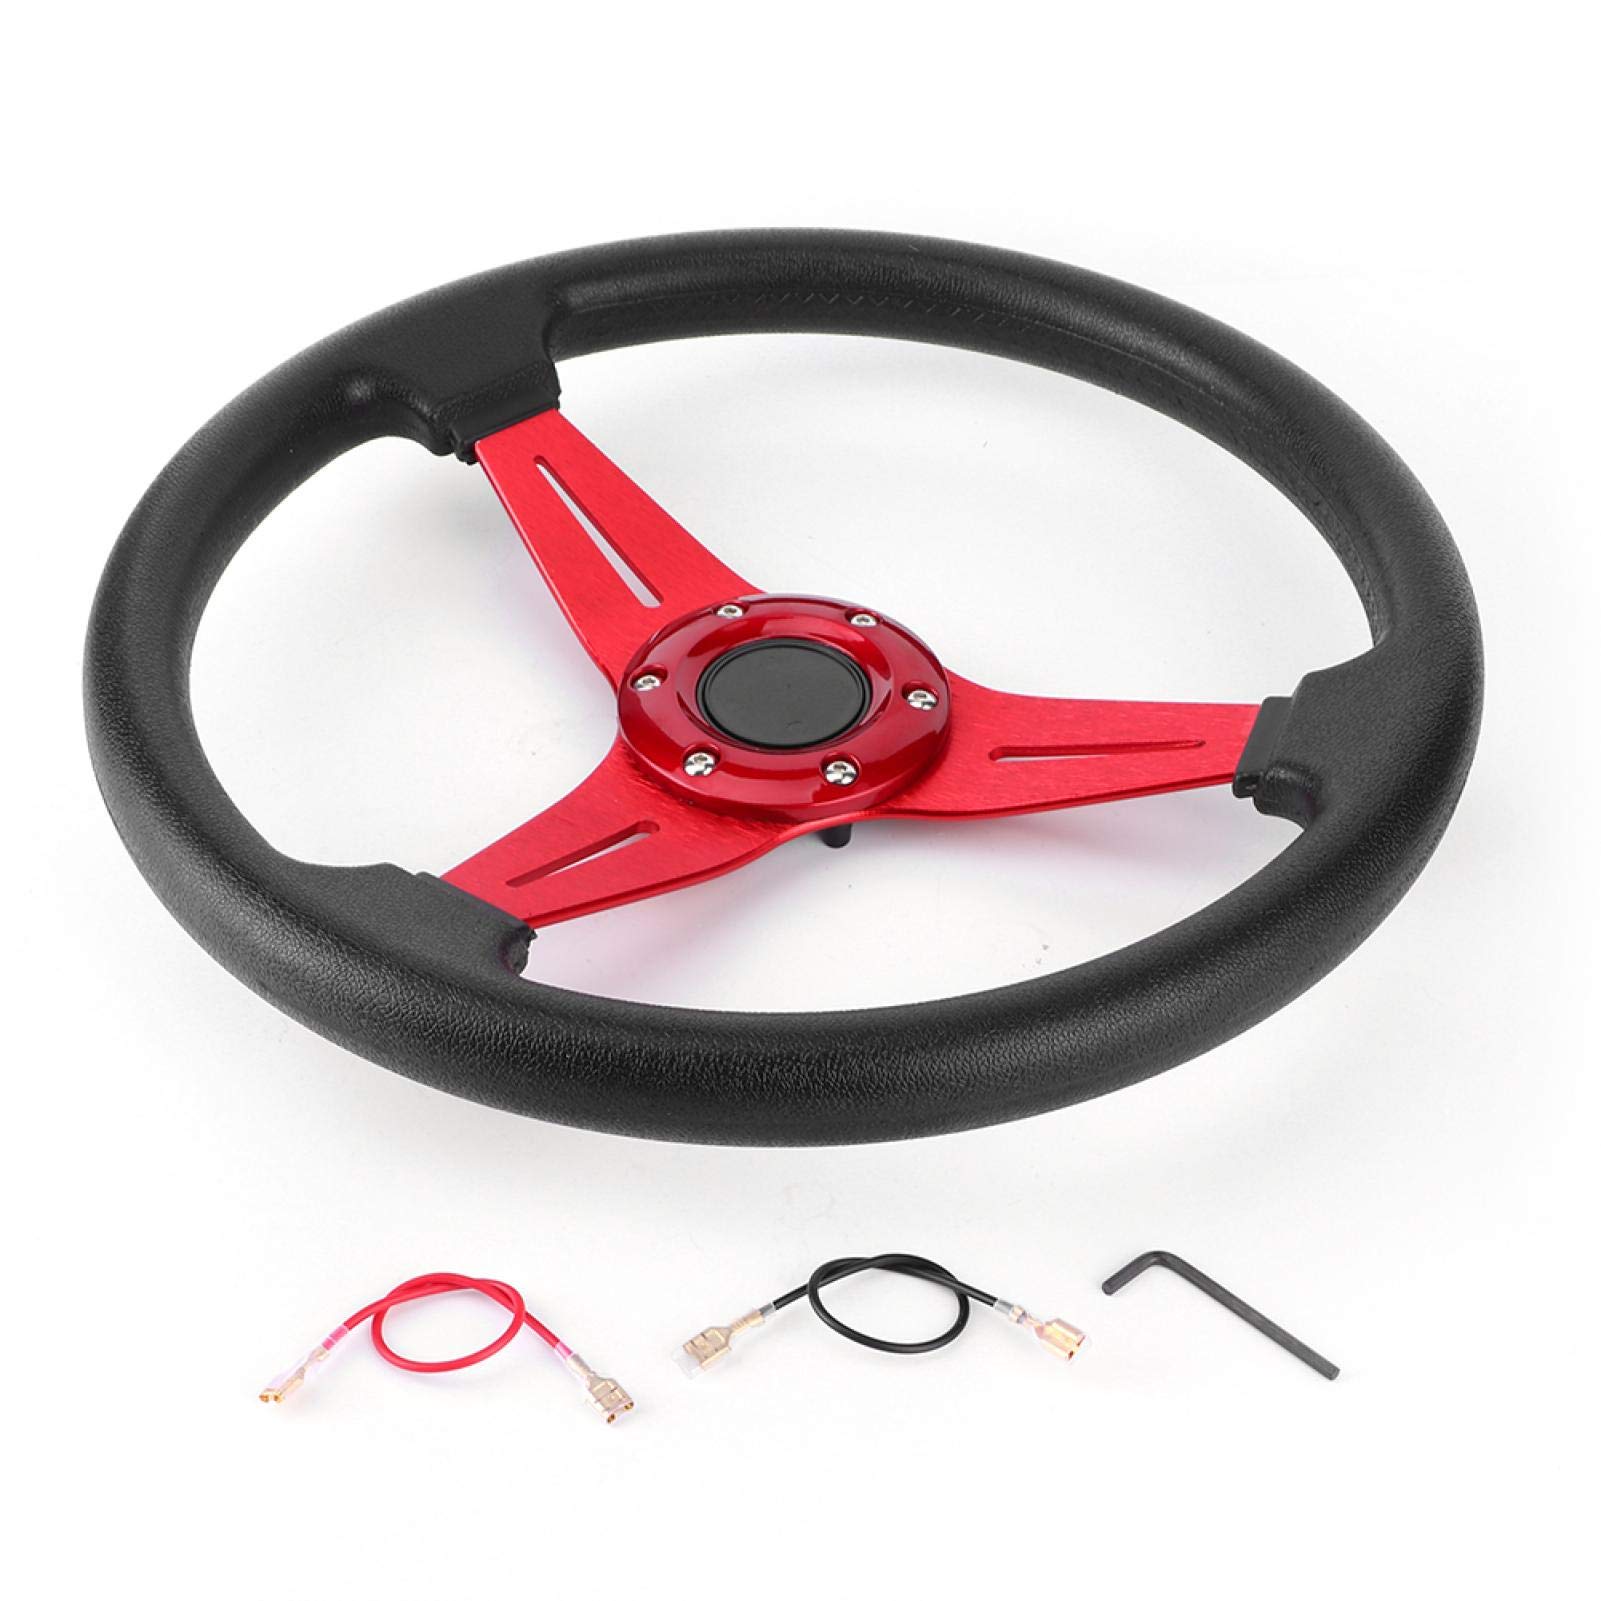 Yctze 350mm/14in Car Steering Wheel,Aluminum Alloy+PU Racing Car Drifting Steering Wheel Replacement Universal Modified Accessory (rot) von Yctze